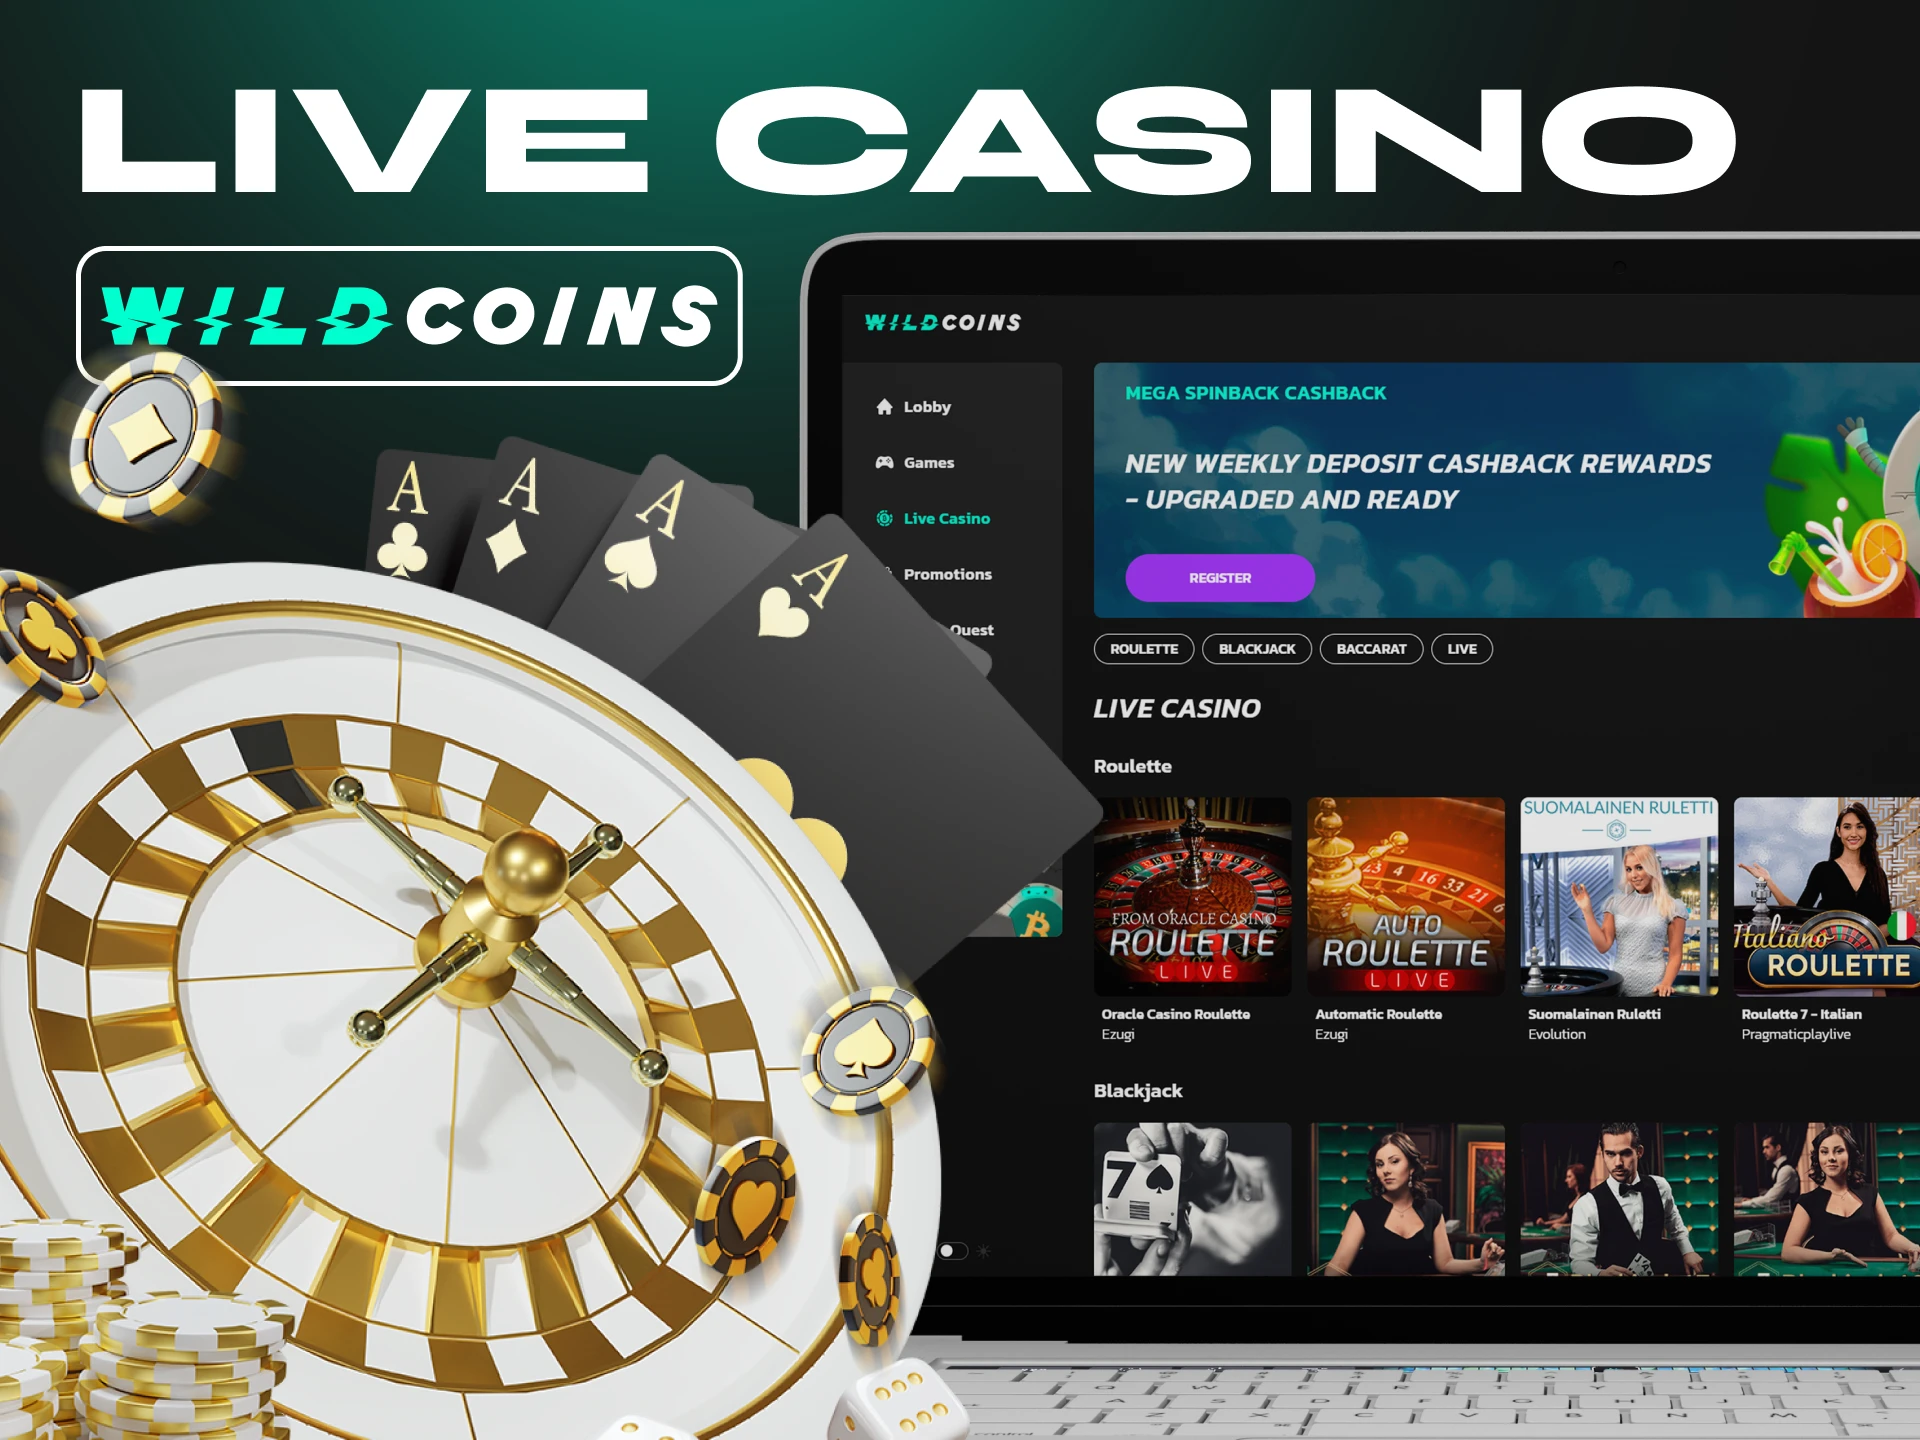 Interact with real dealers when playing in a live casino on Wildcoins.